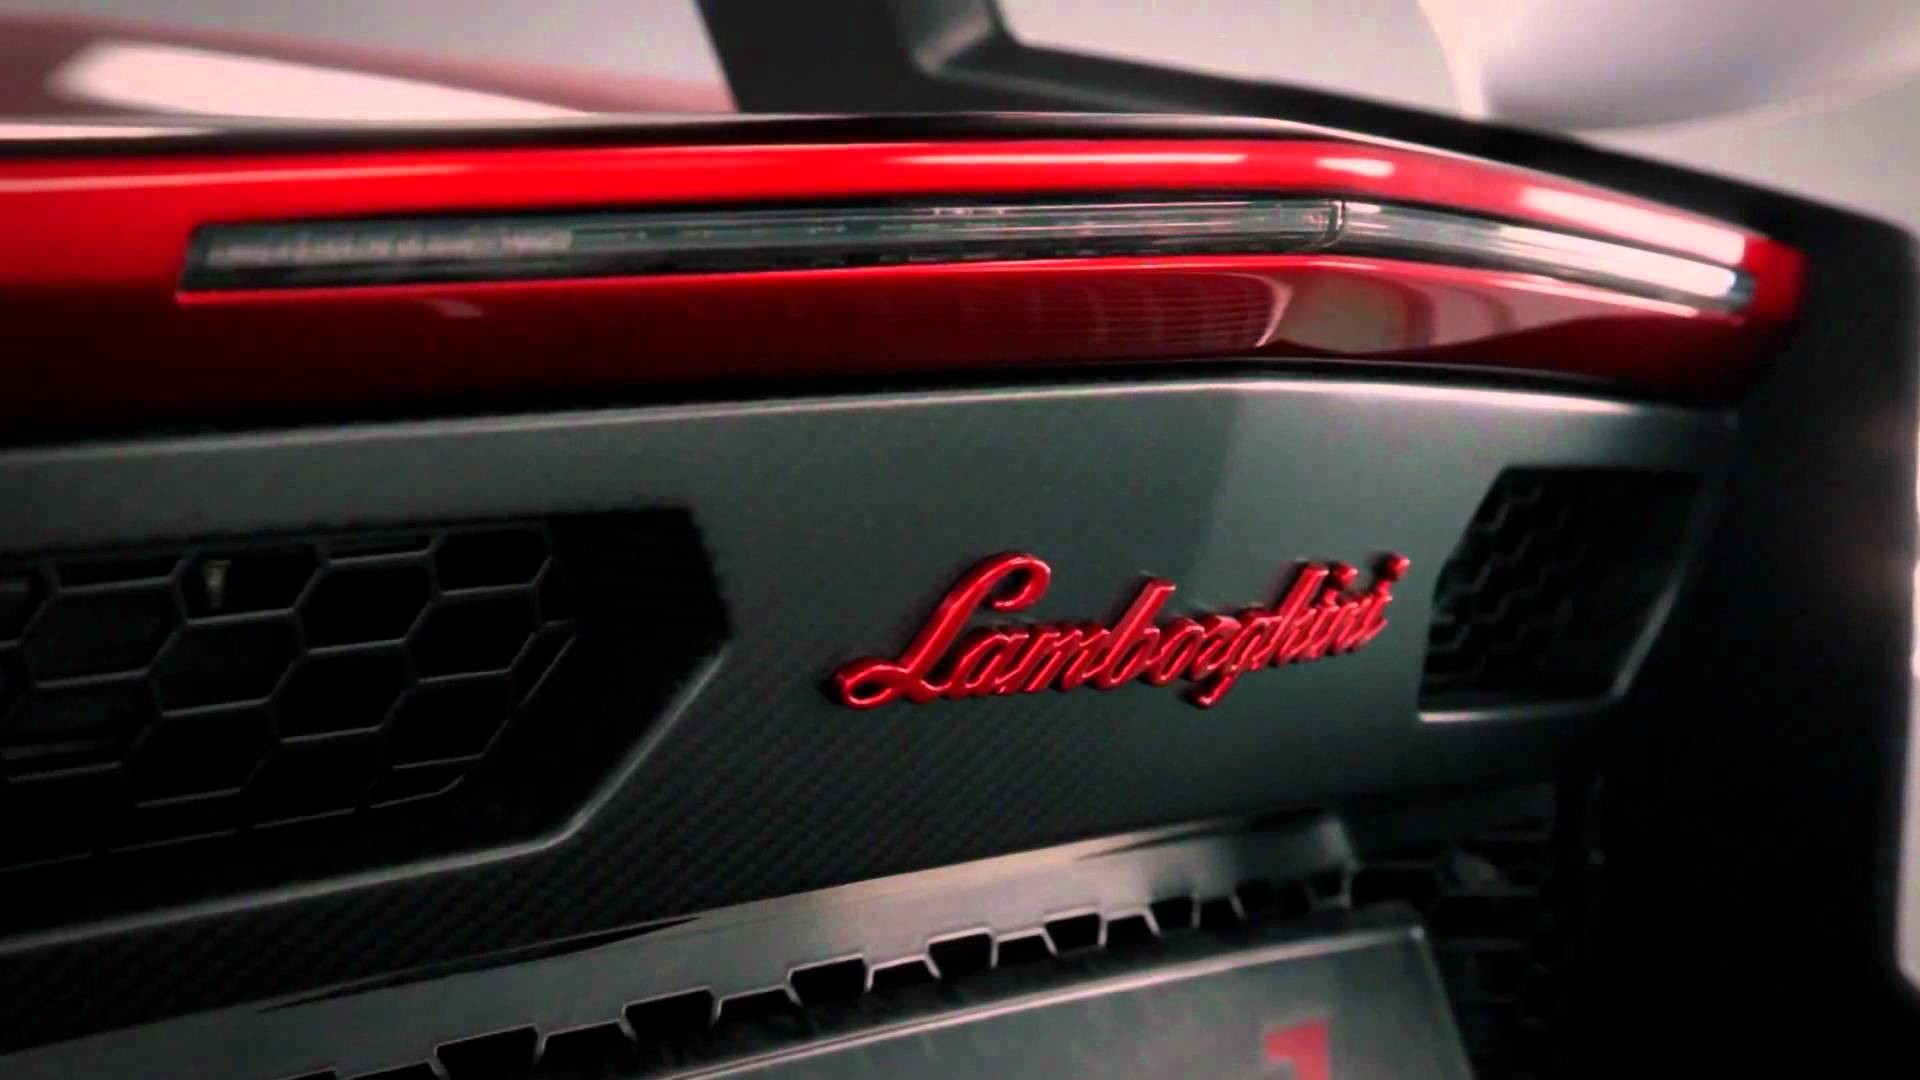 1920x1080 [HD-1080p] The Making of Lamborghini Aventador J ~ Cars Fans Dont Miss This  ~ Leaked Video.mp4 - YouTube